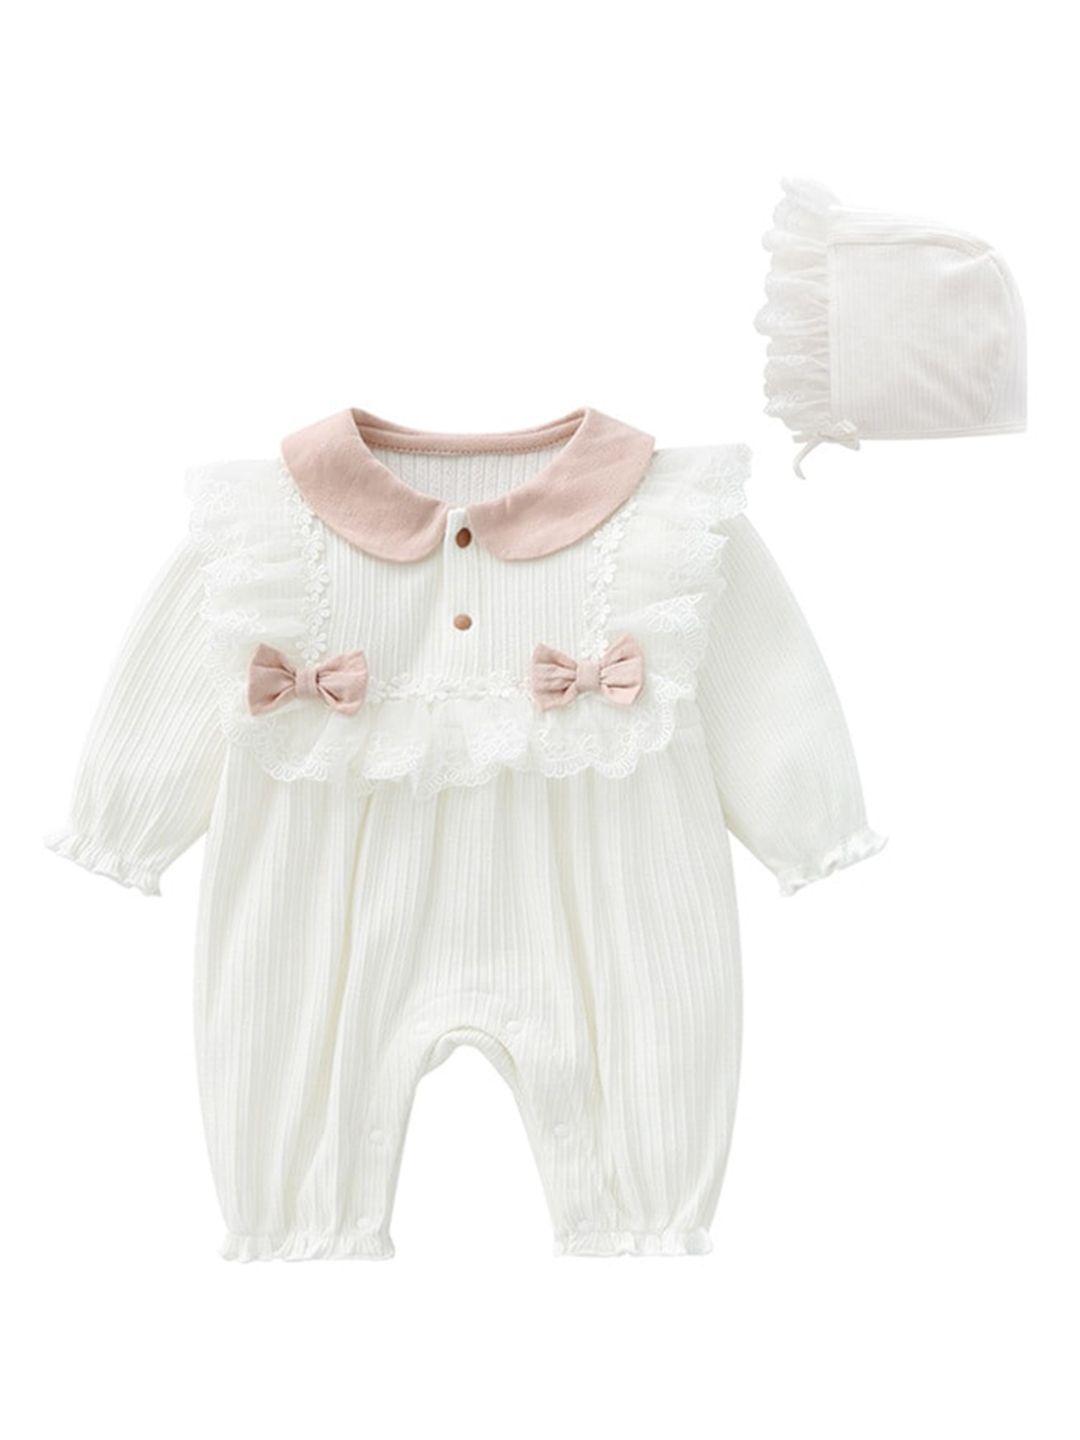 stylecast infant girls white & pink self-design ruffled bow detail cotton romper with cap